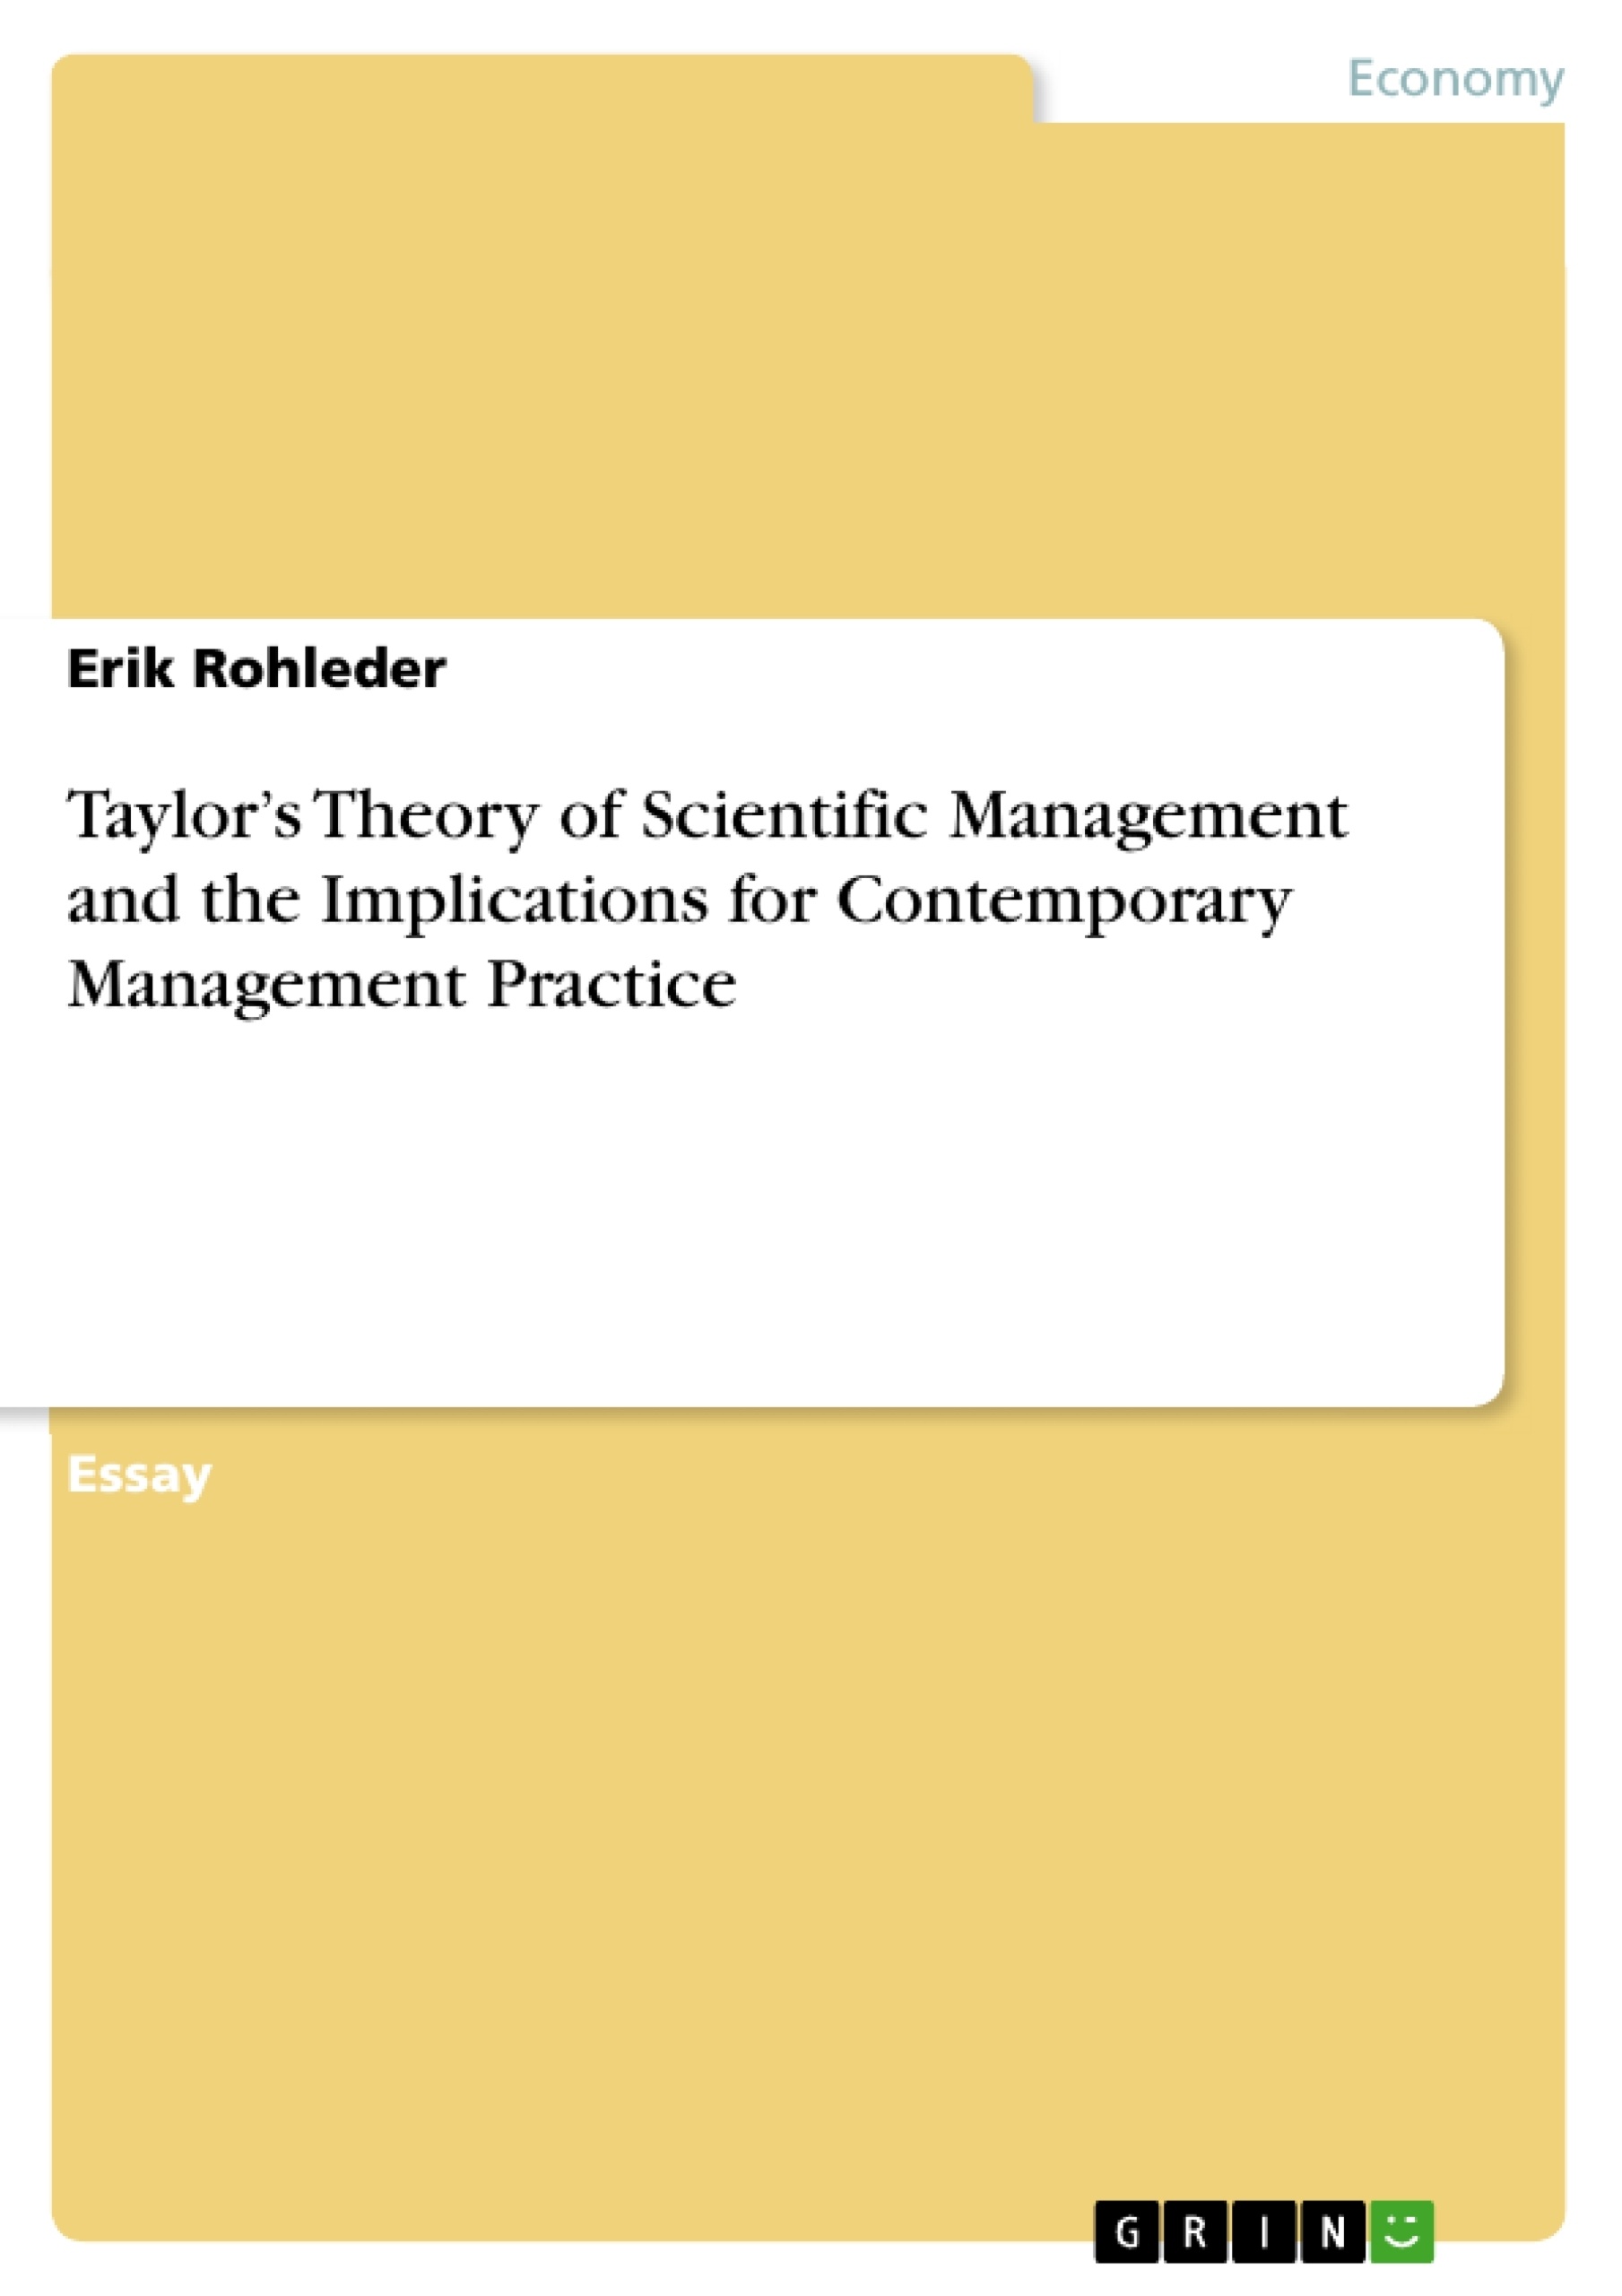 and　Practice　the　of　Theory　Management　Taylor's　Management　for　Contemporary　Implications　Scientific　GRIN